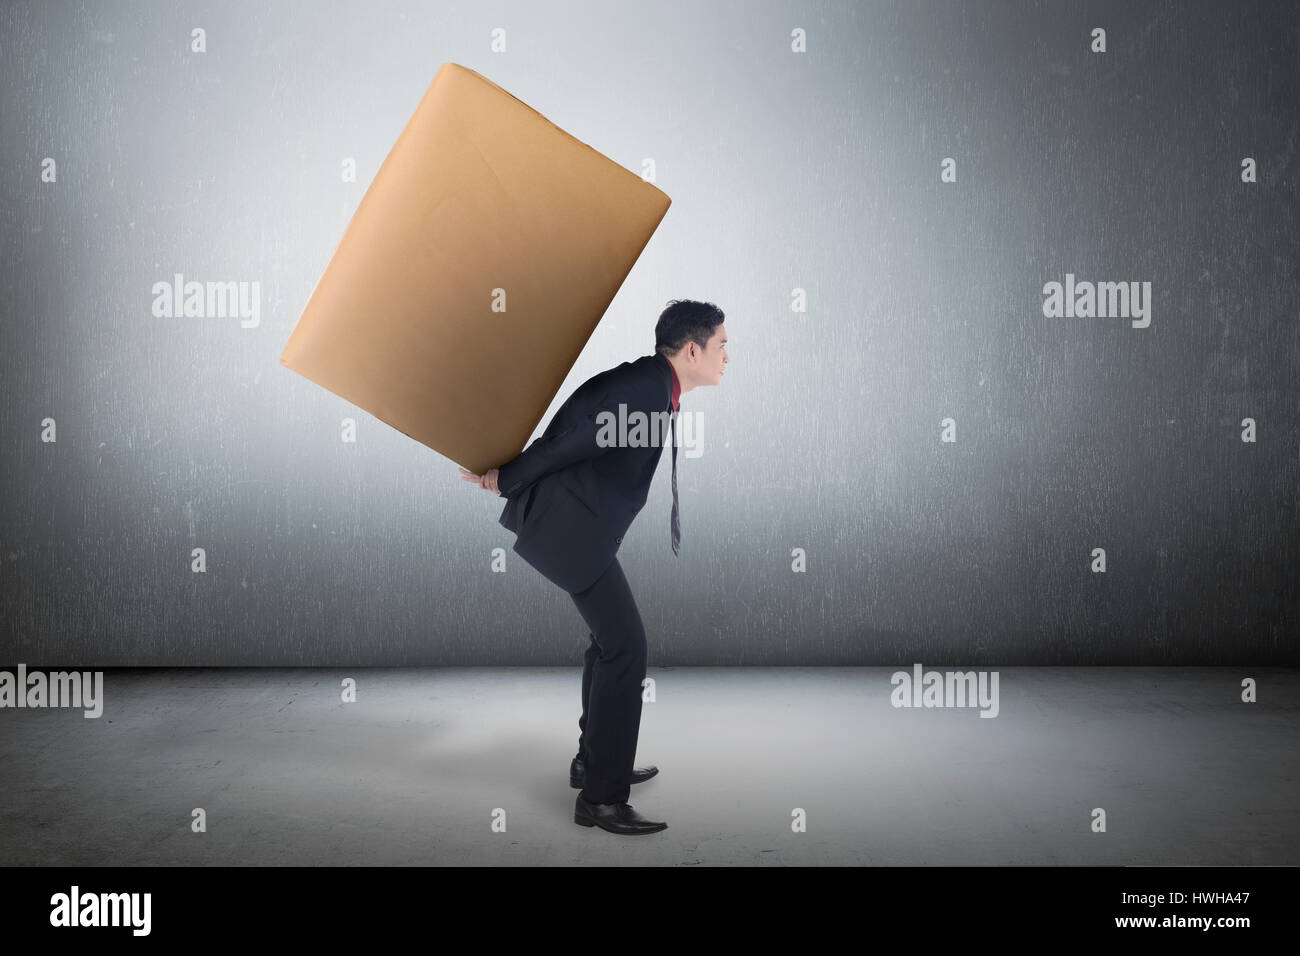 Image of asian business man carrying brown package on his back Stock Photo